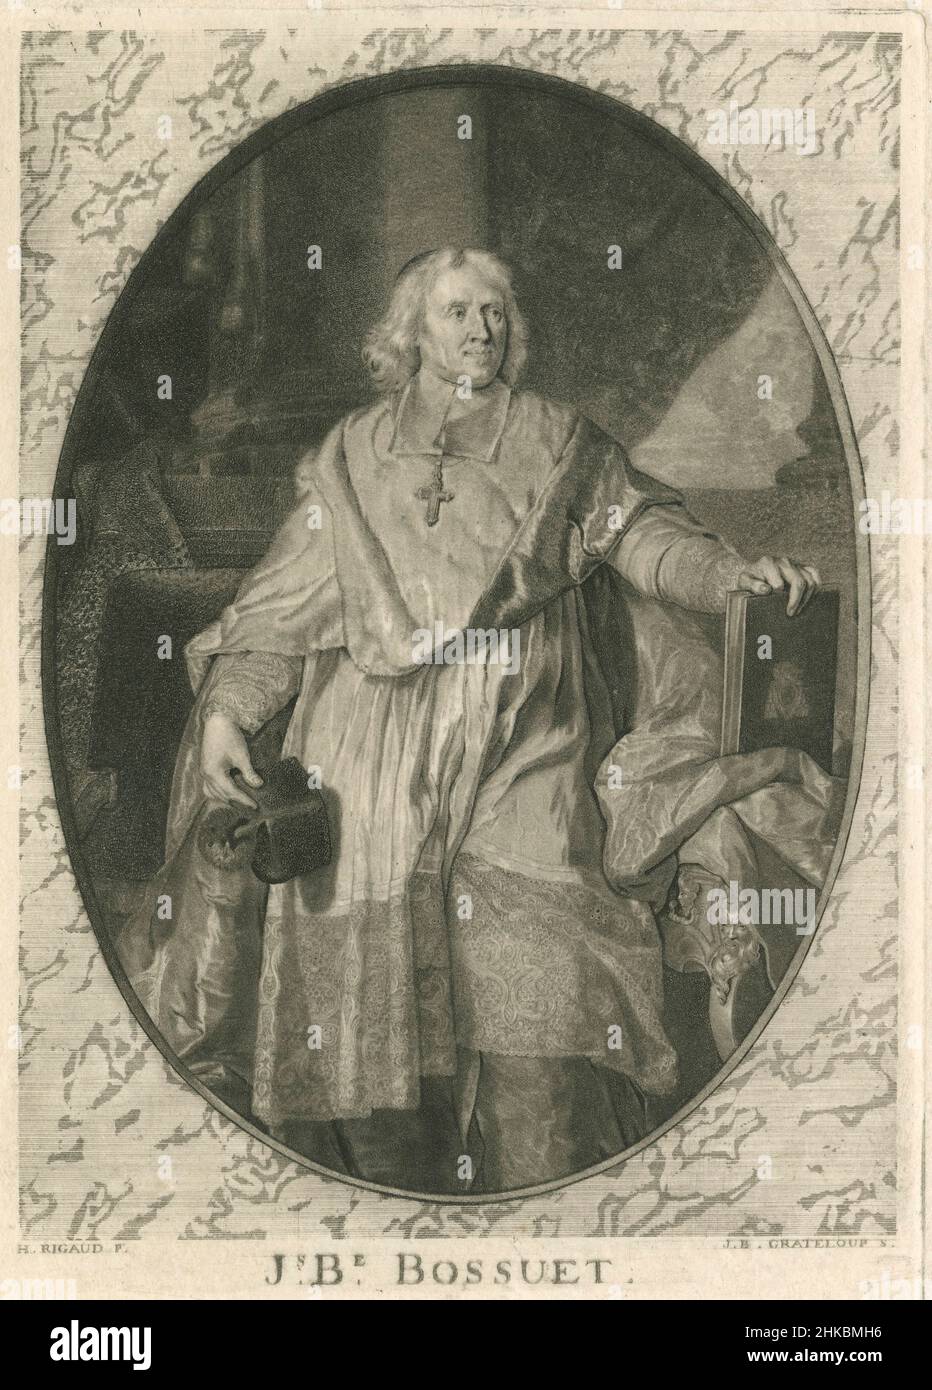 Antique early 19th century etching of Jacques-Benigne Bossuet. Jacques-Bénigne Lignel Bossuet (1627-1704) was a French bishop and theologian, renowned for his sermons and other addresses. Engraving by Jean-Baptiste de Grateloup (1735-1817) after painting by Hyacinthe Rigaud (1659-1743). SOURCE: ORIGINAL ENGRAVING Stock Photo